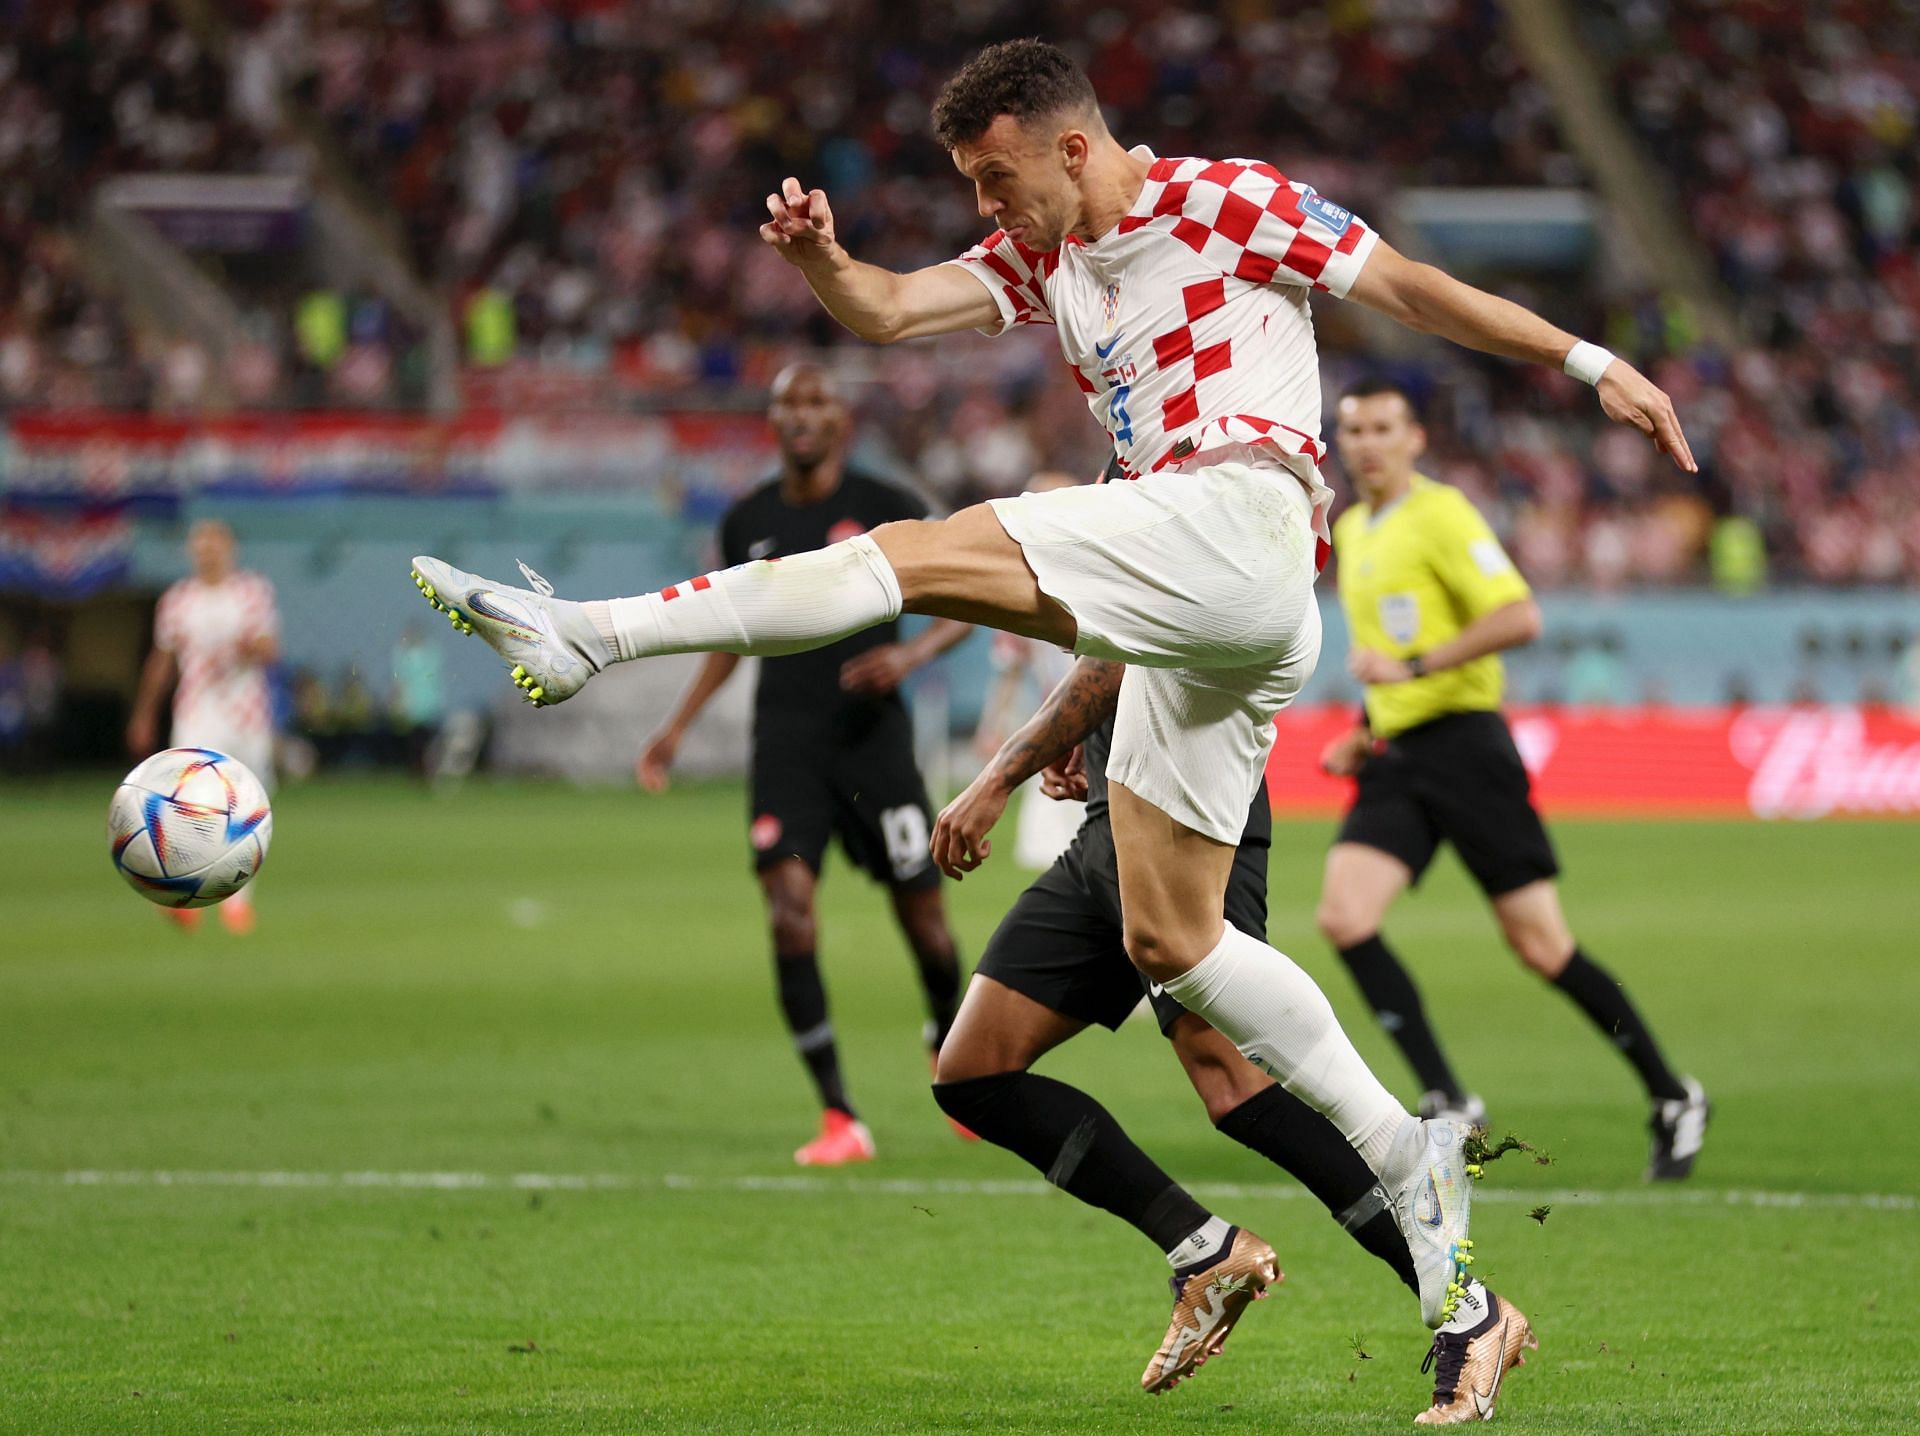 Two impeccable assists for Perisic